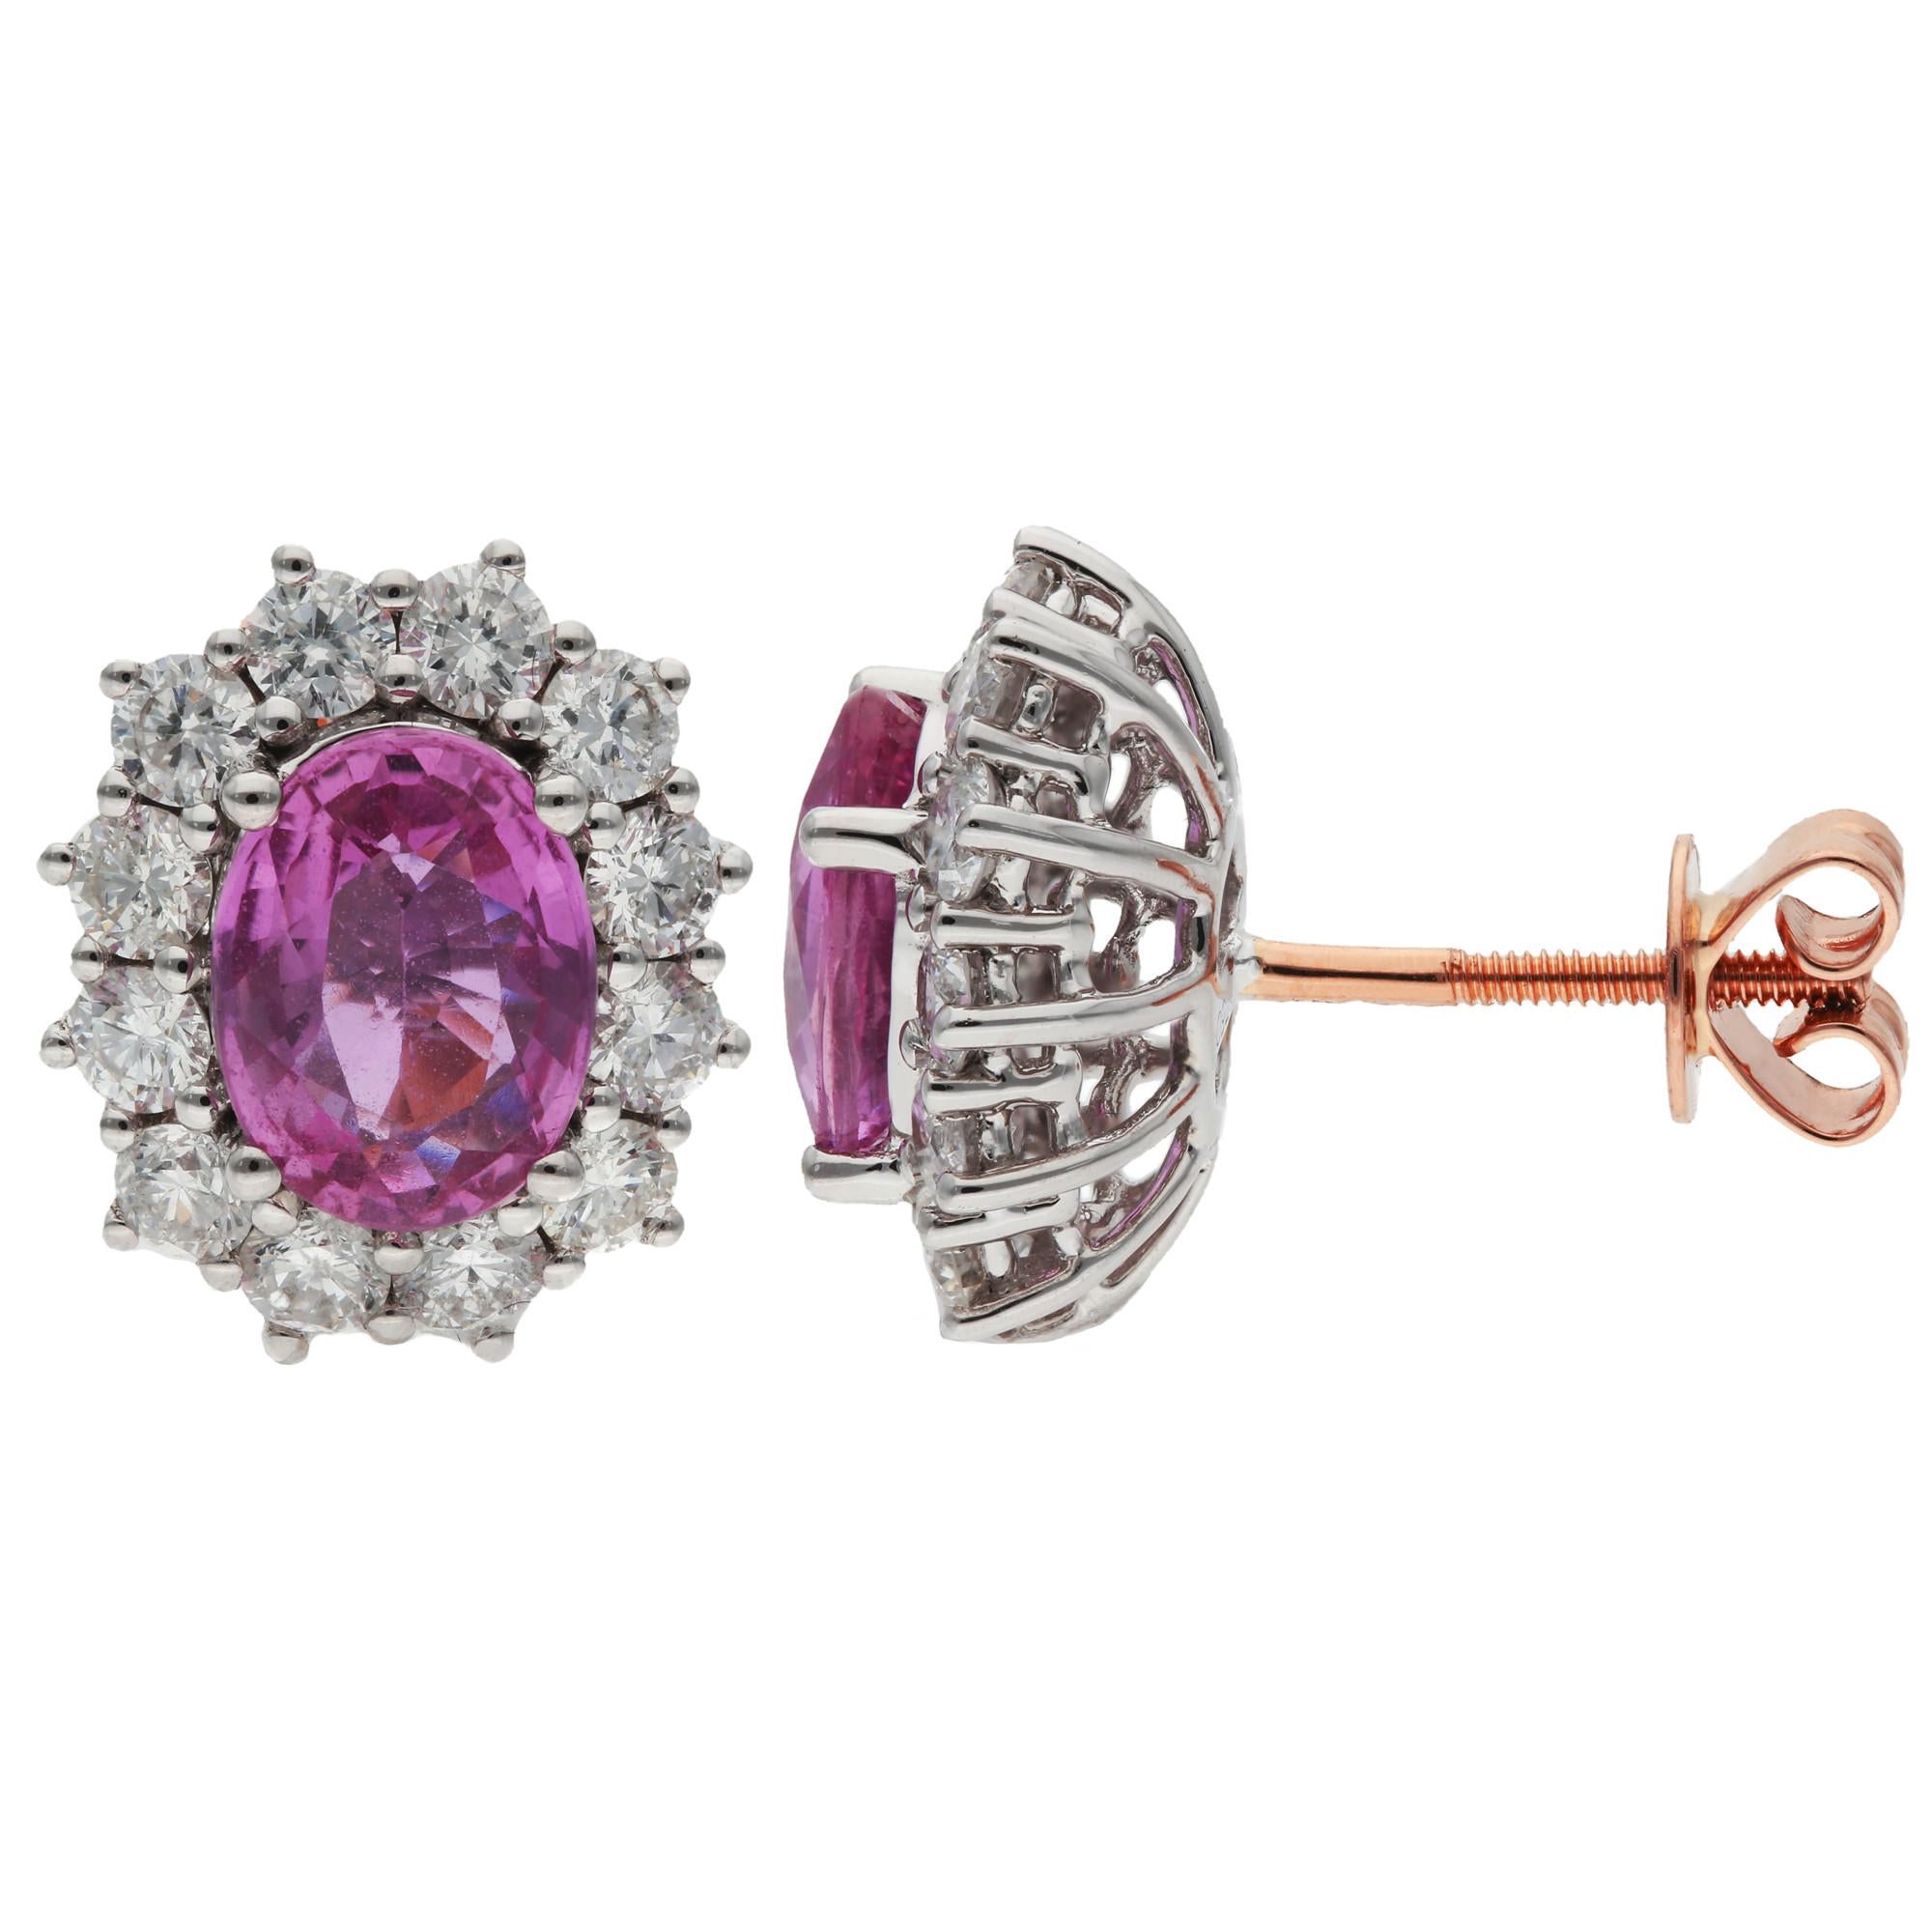 18ct White & Rose Gold 2.00ct Pink Sapphire & 1.20ct Diamond Halo Stud Earrings

Introducing our enchanting 18ct White Gold Pink Sapphire & Diamond Halo Stud Earrings, a fusion of vibrant charm and sophisticated elegance. At the heart of each